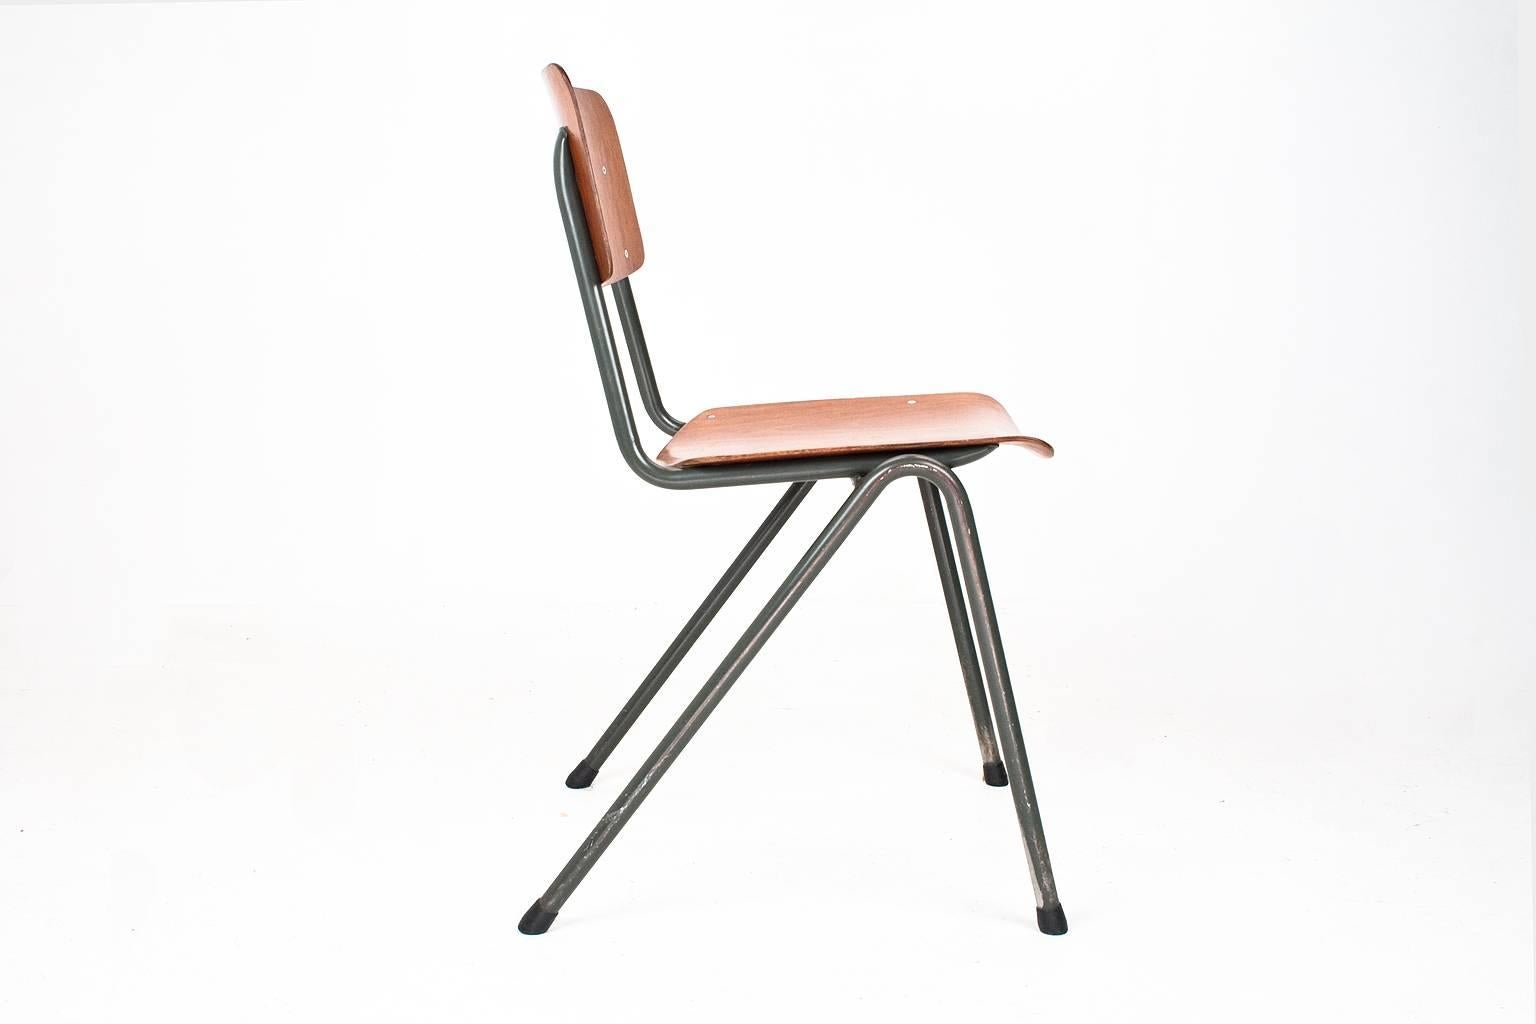 Late 20th Century Dutch Industrial School Chairs 1970, Laminated Wood and Grey Metal Frame